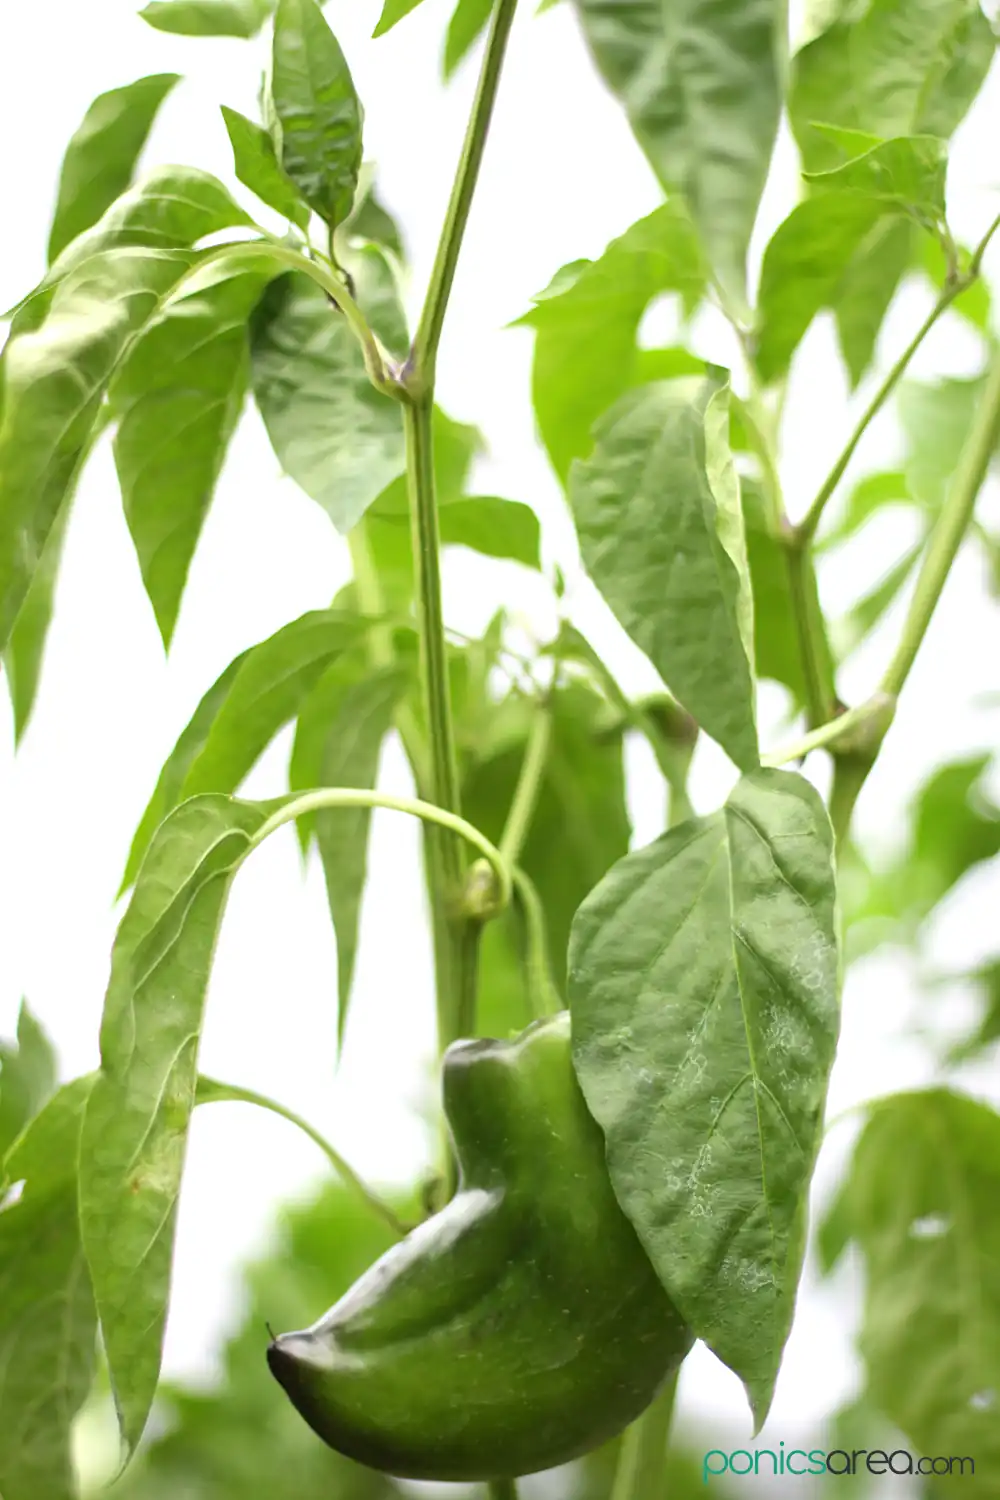 peppers grown hydroponically